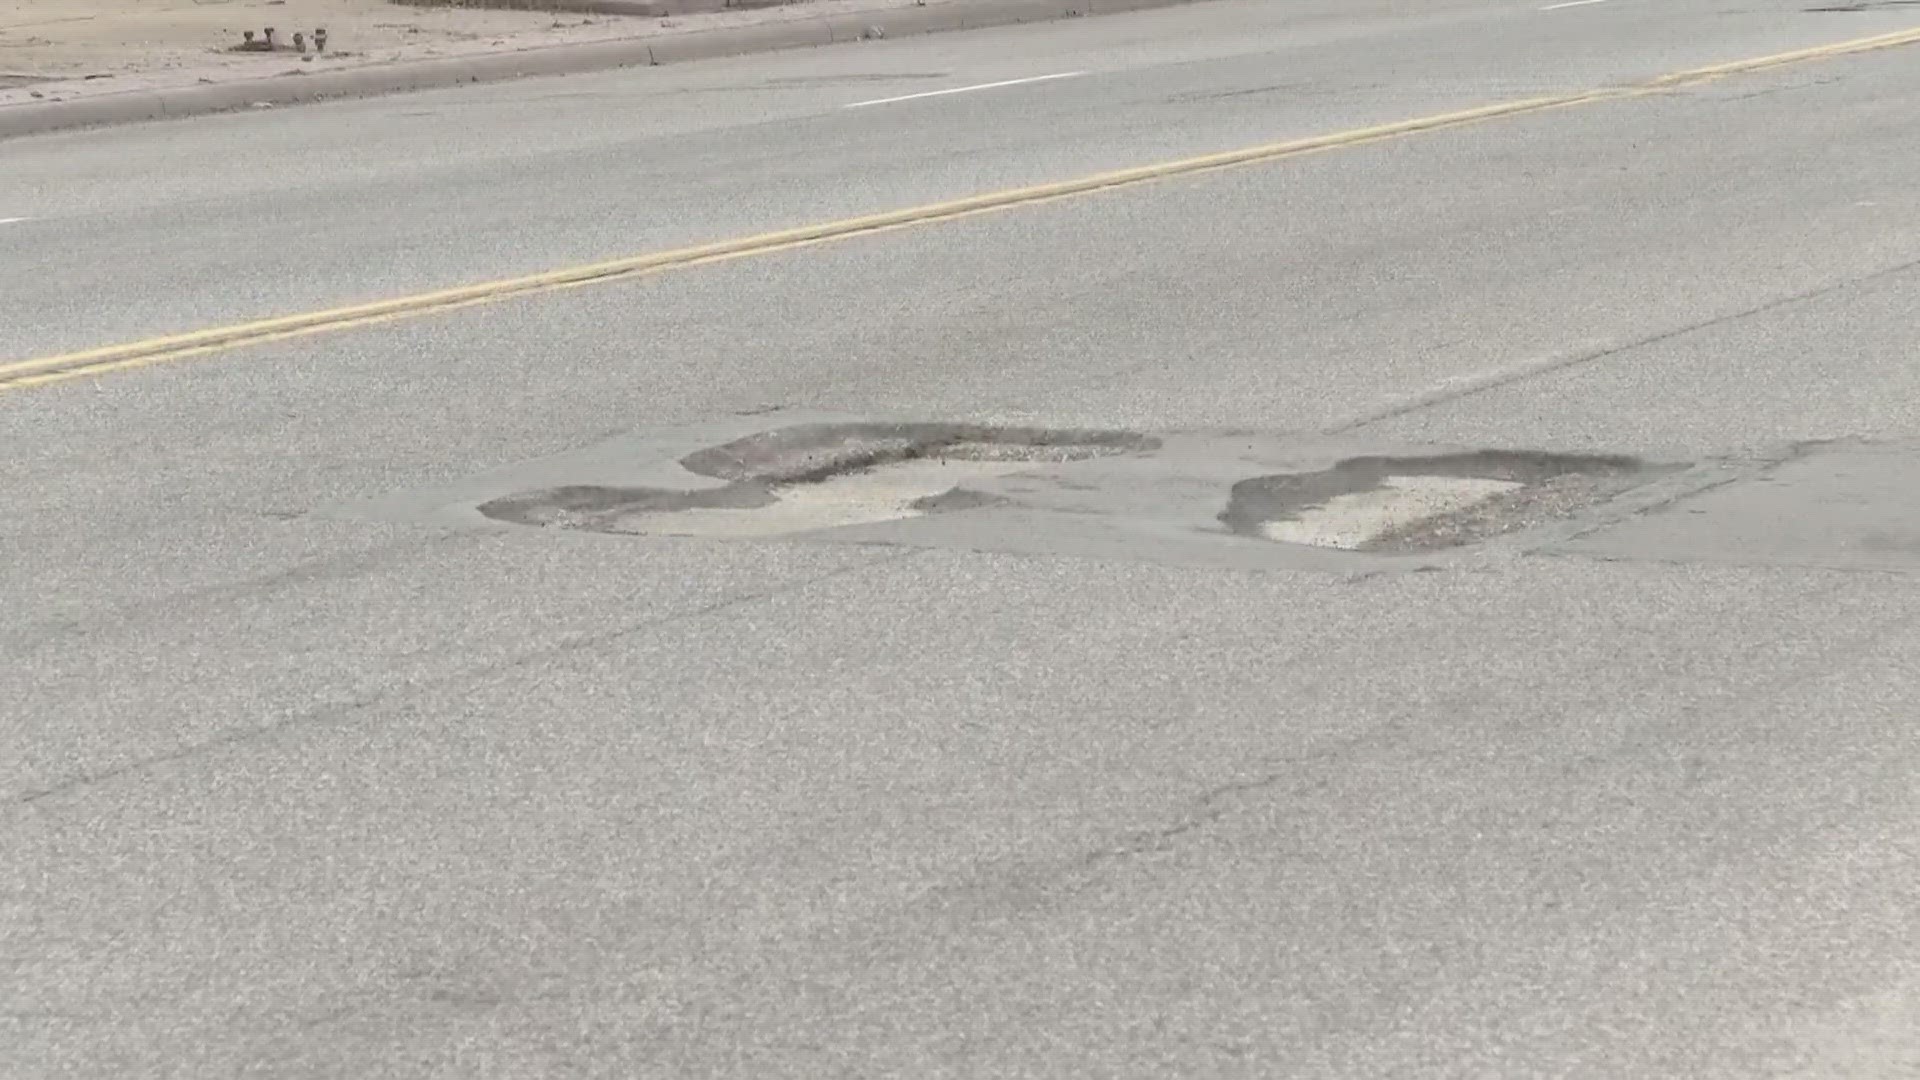 Everyone is dodging potholes right now!  And car repair shops are getting flooded with damaged tires to fix or replace.